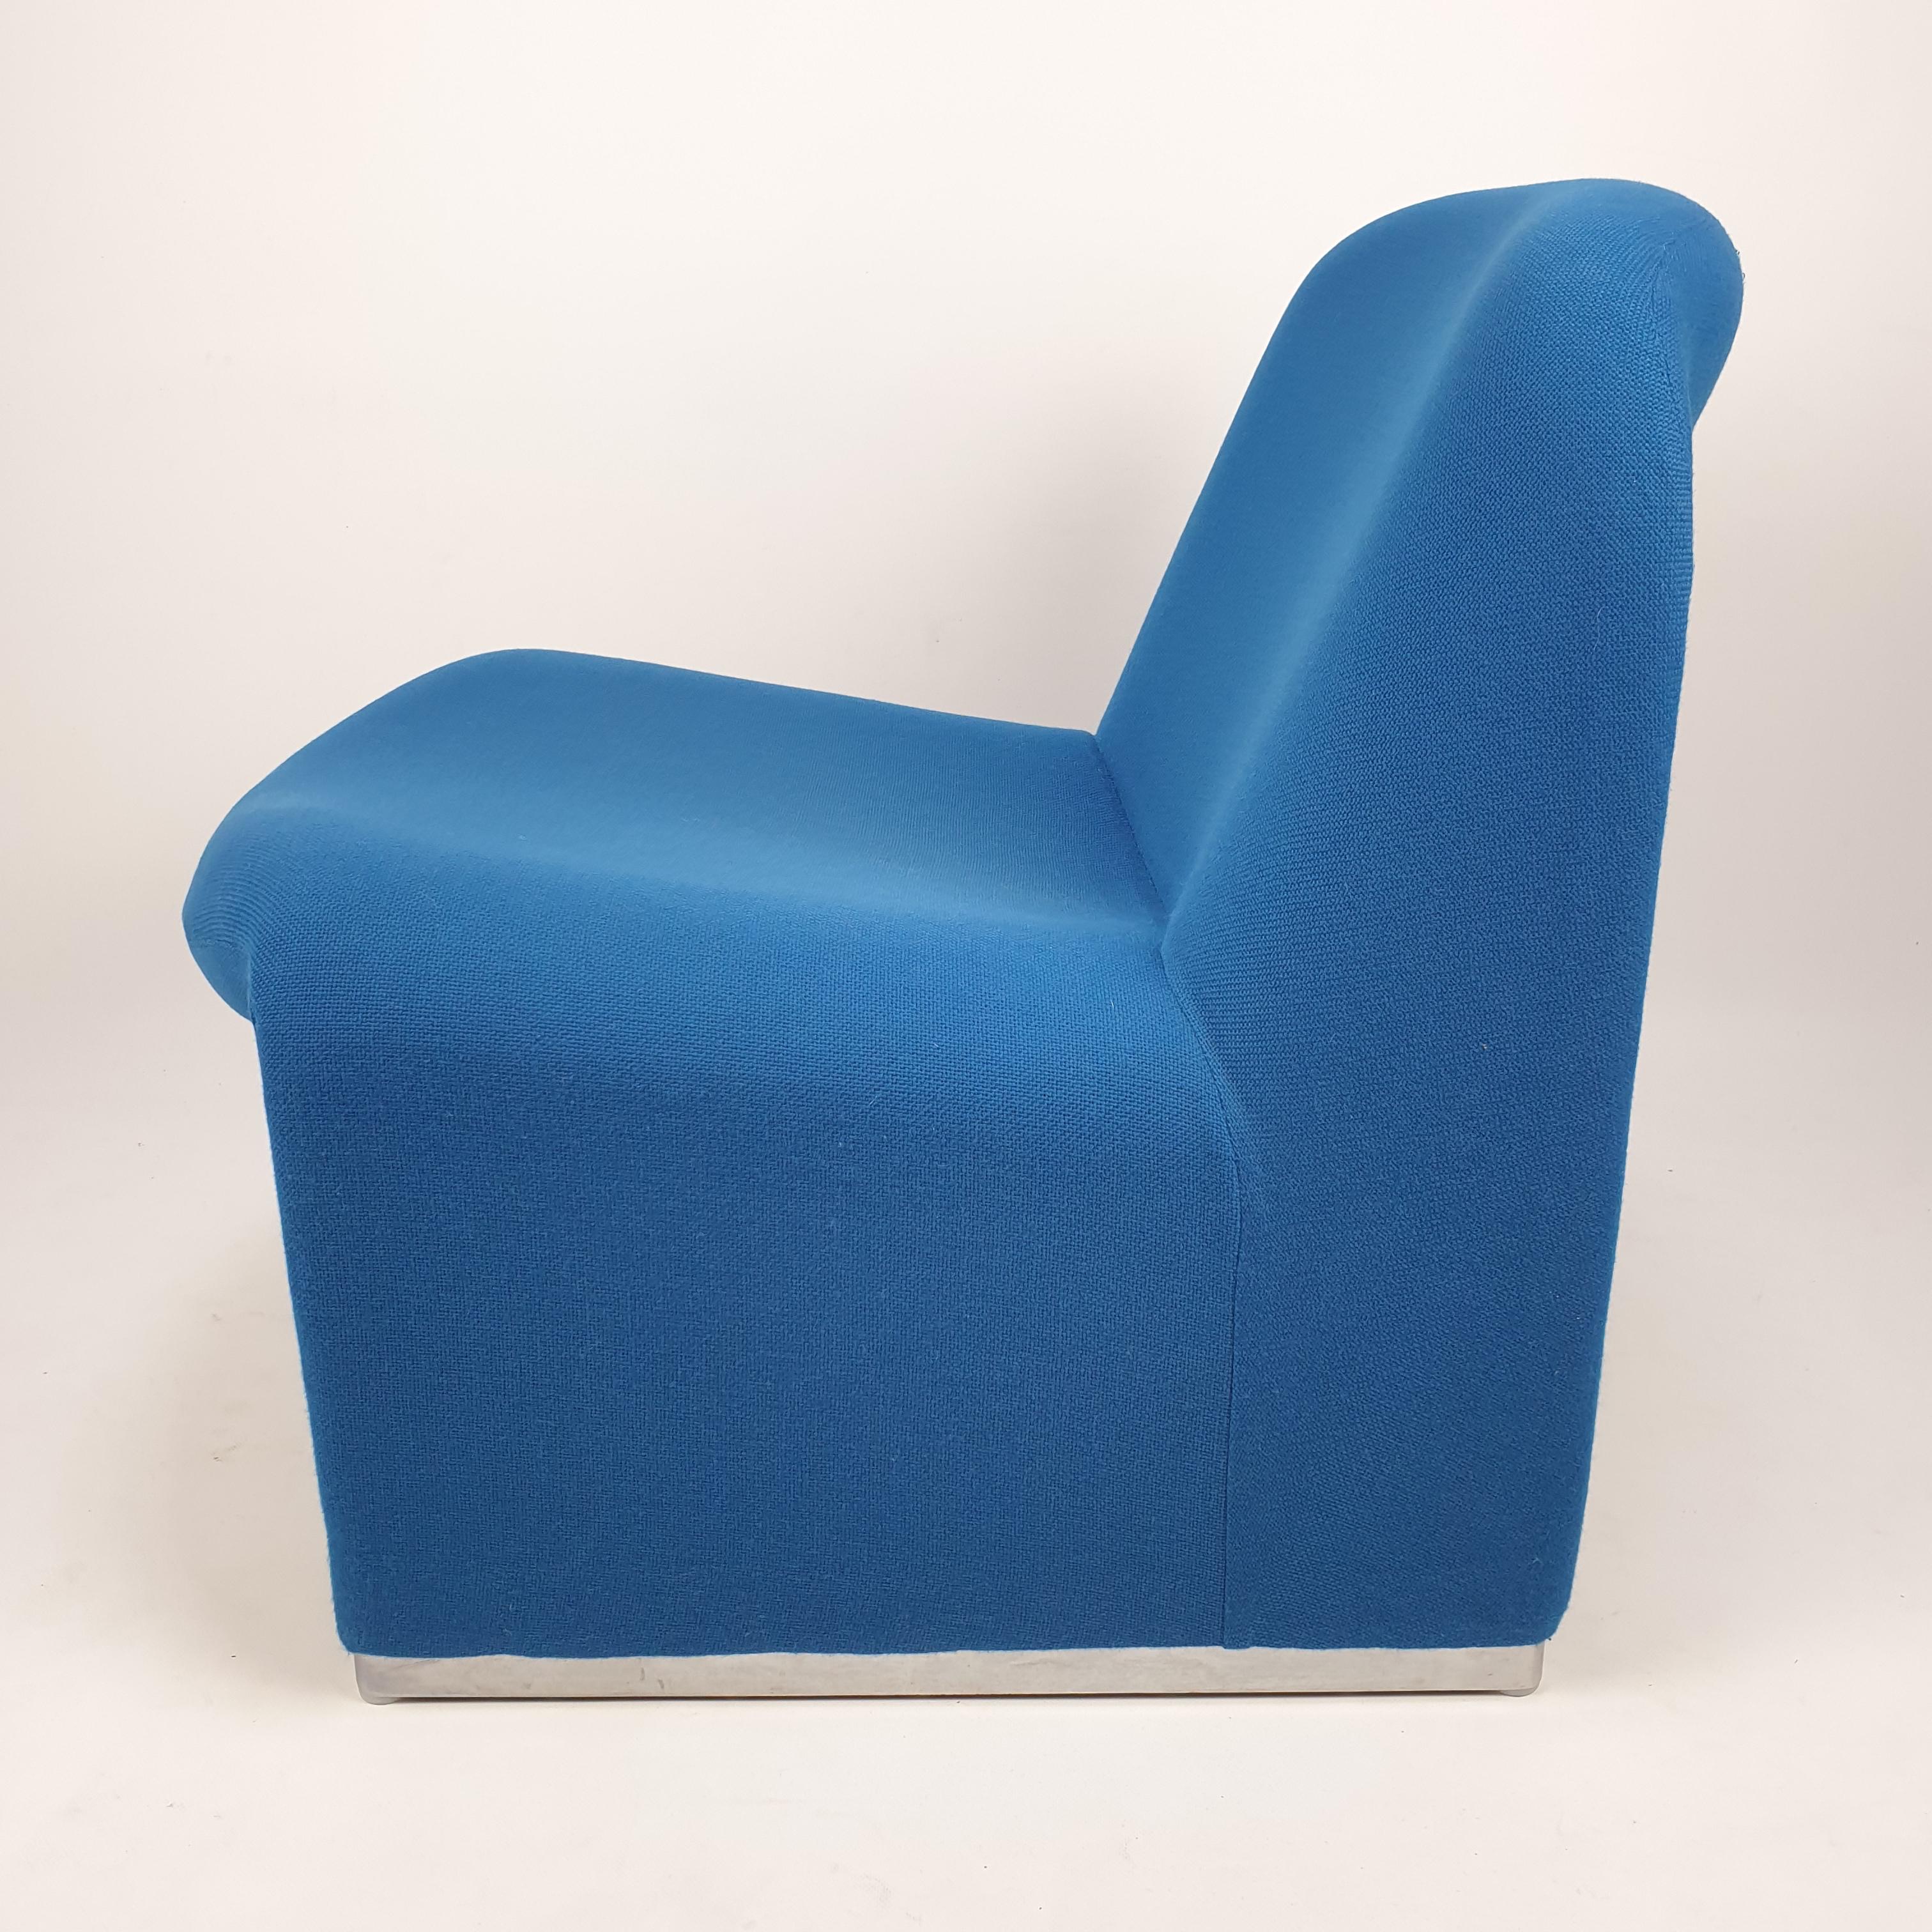 Italian Alky Lounge Chair by Giancarlo Piretti for Artifort, 1970s